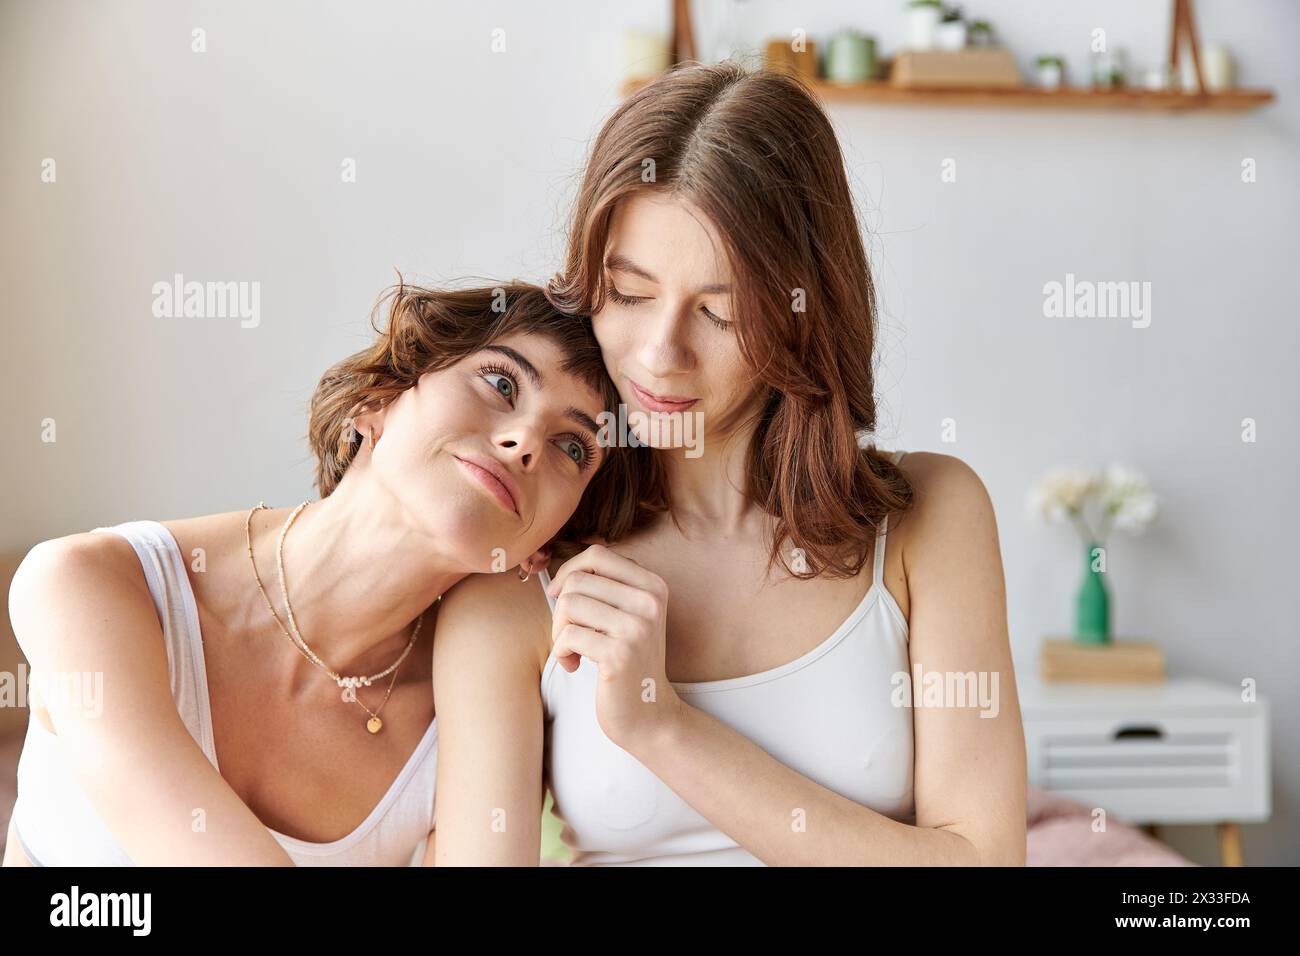 Two women in comfy attire sitting next to each other on a bed. Stock Photo